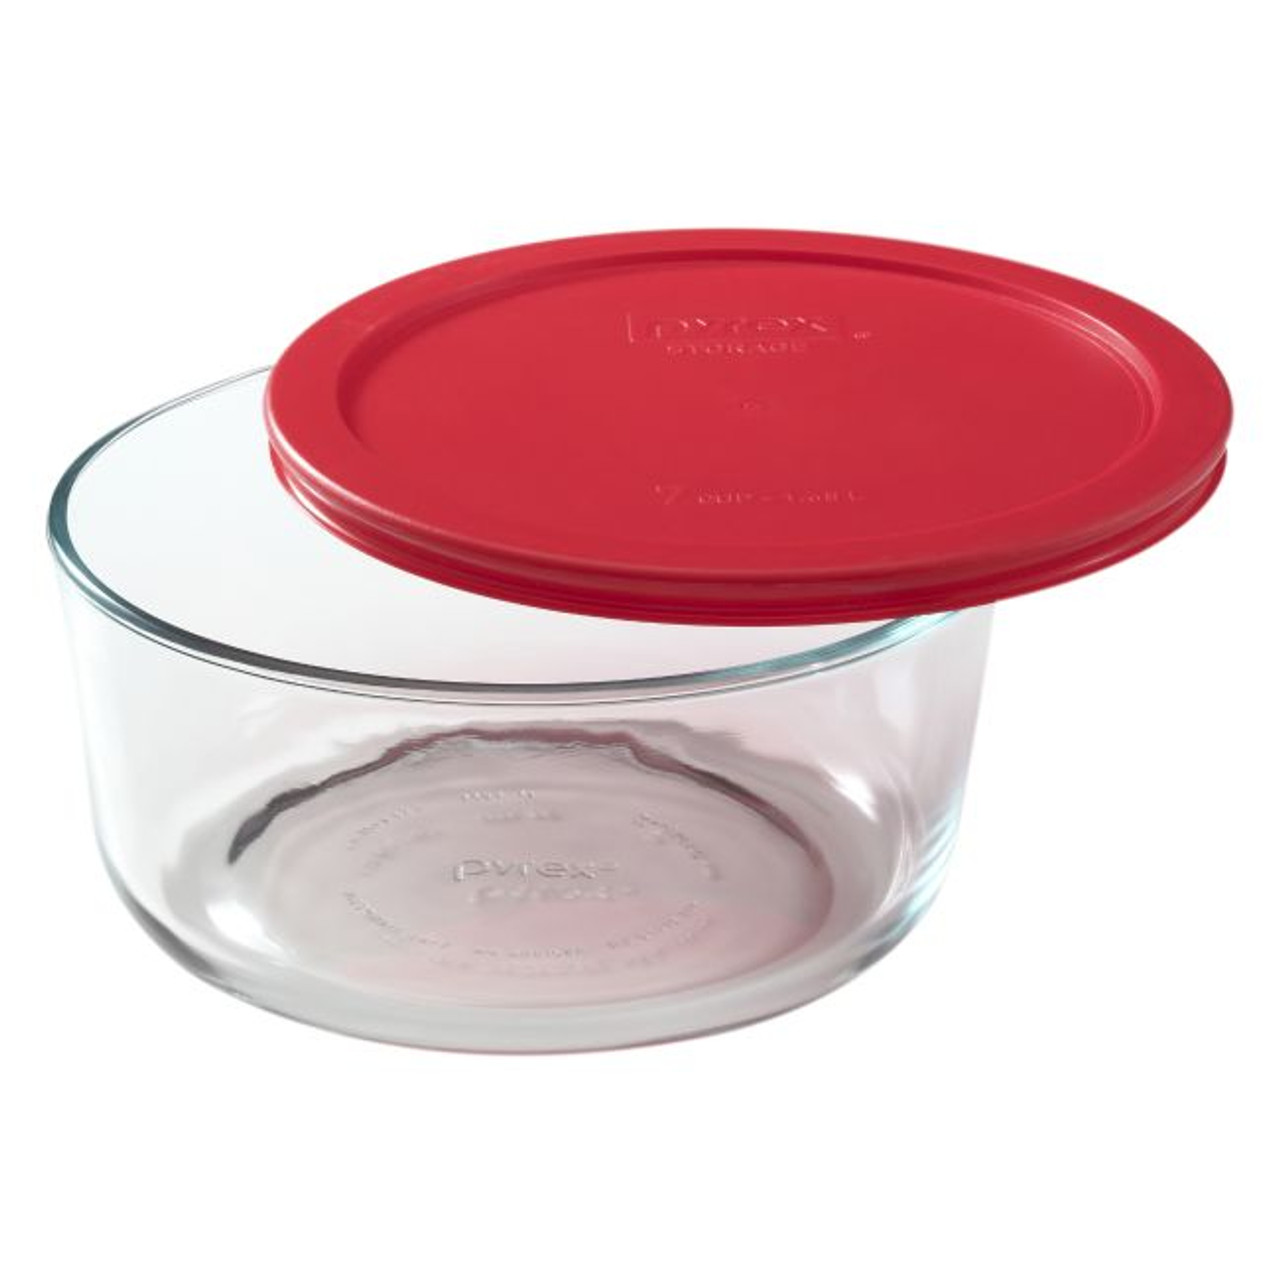 Pyrex 7201 Round Glass Food Storage Bowl w/ 7201-PC Loring Pink Lid Cover